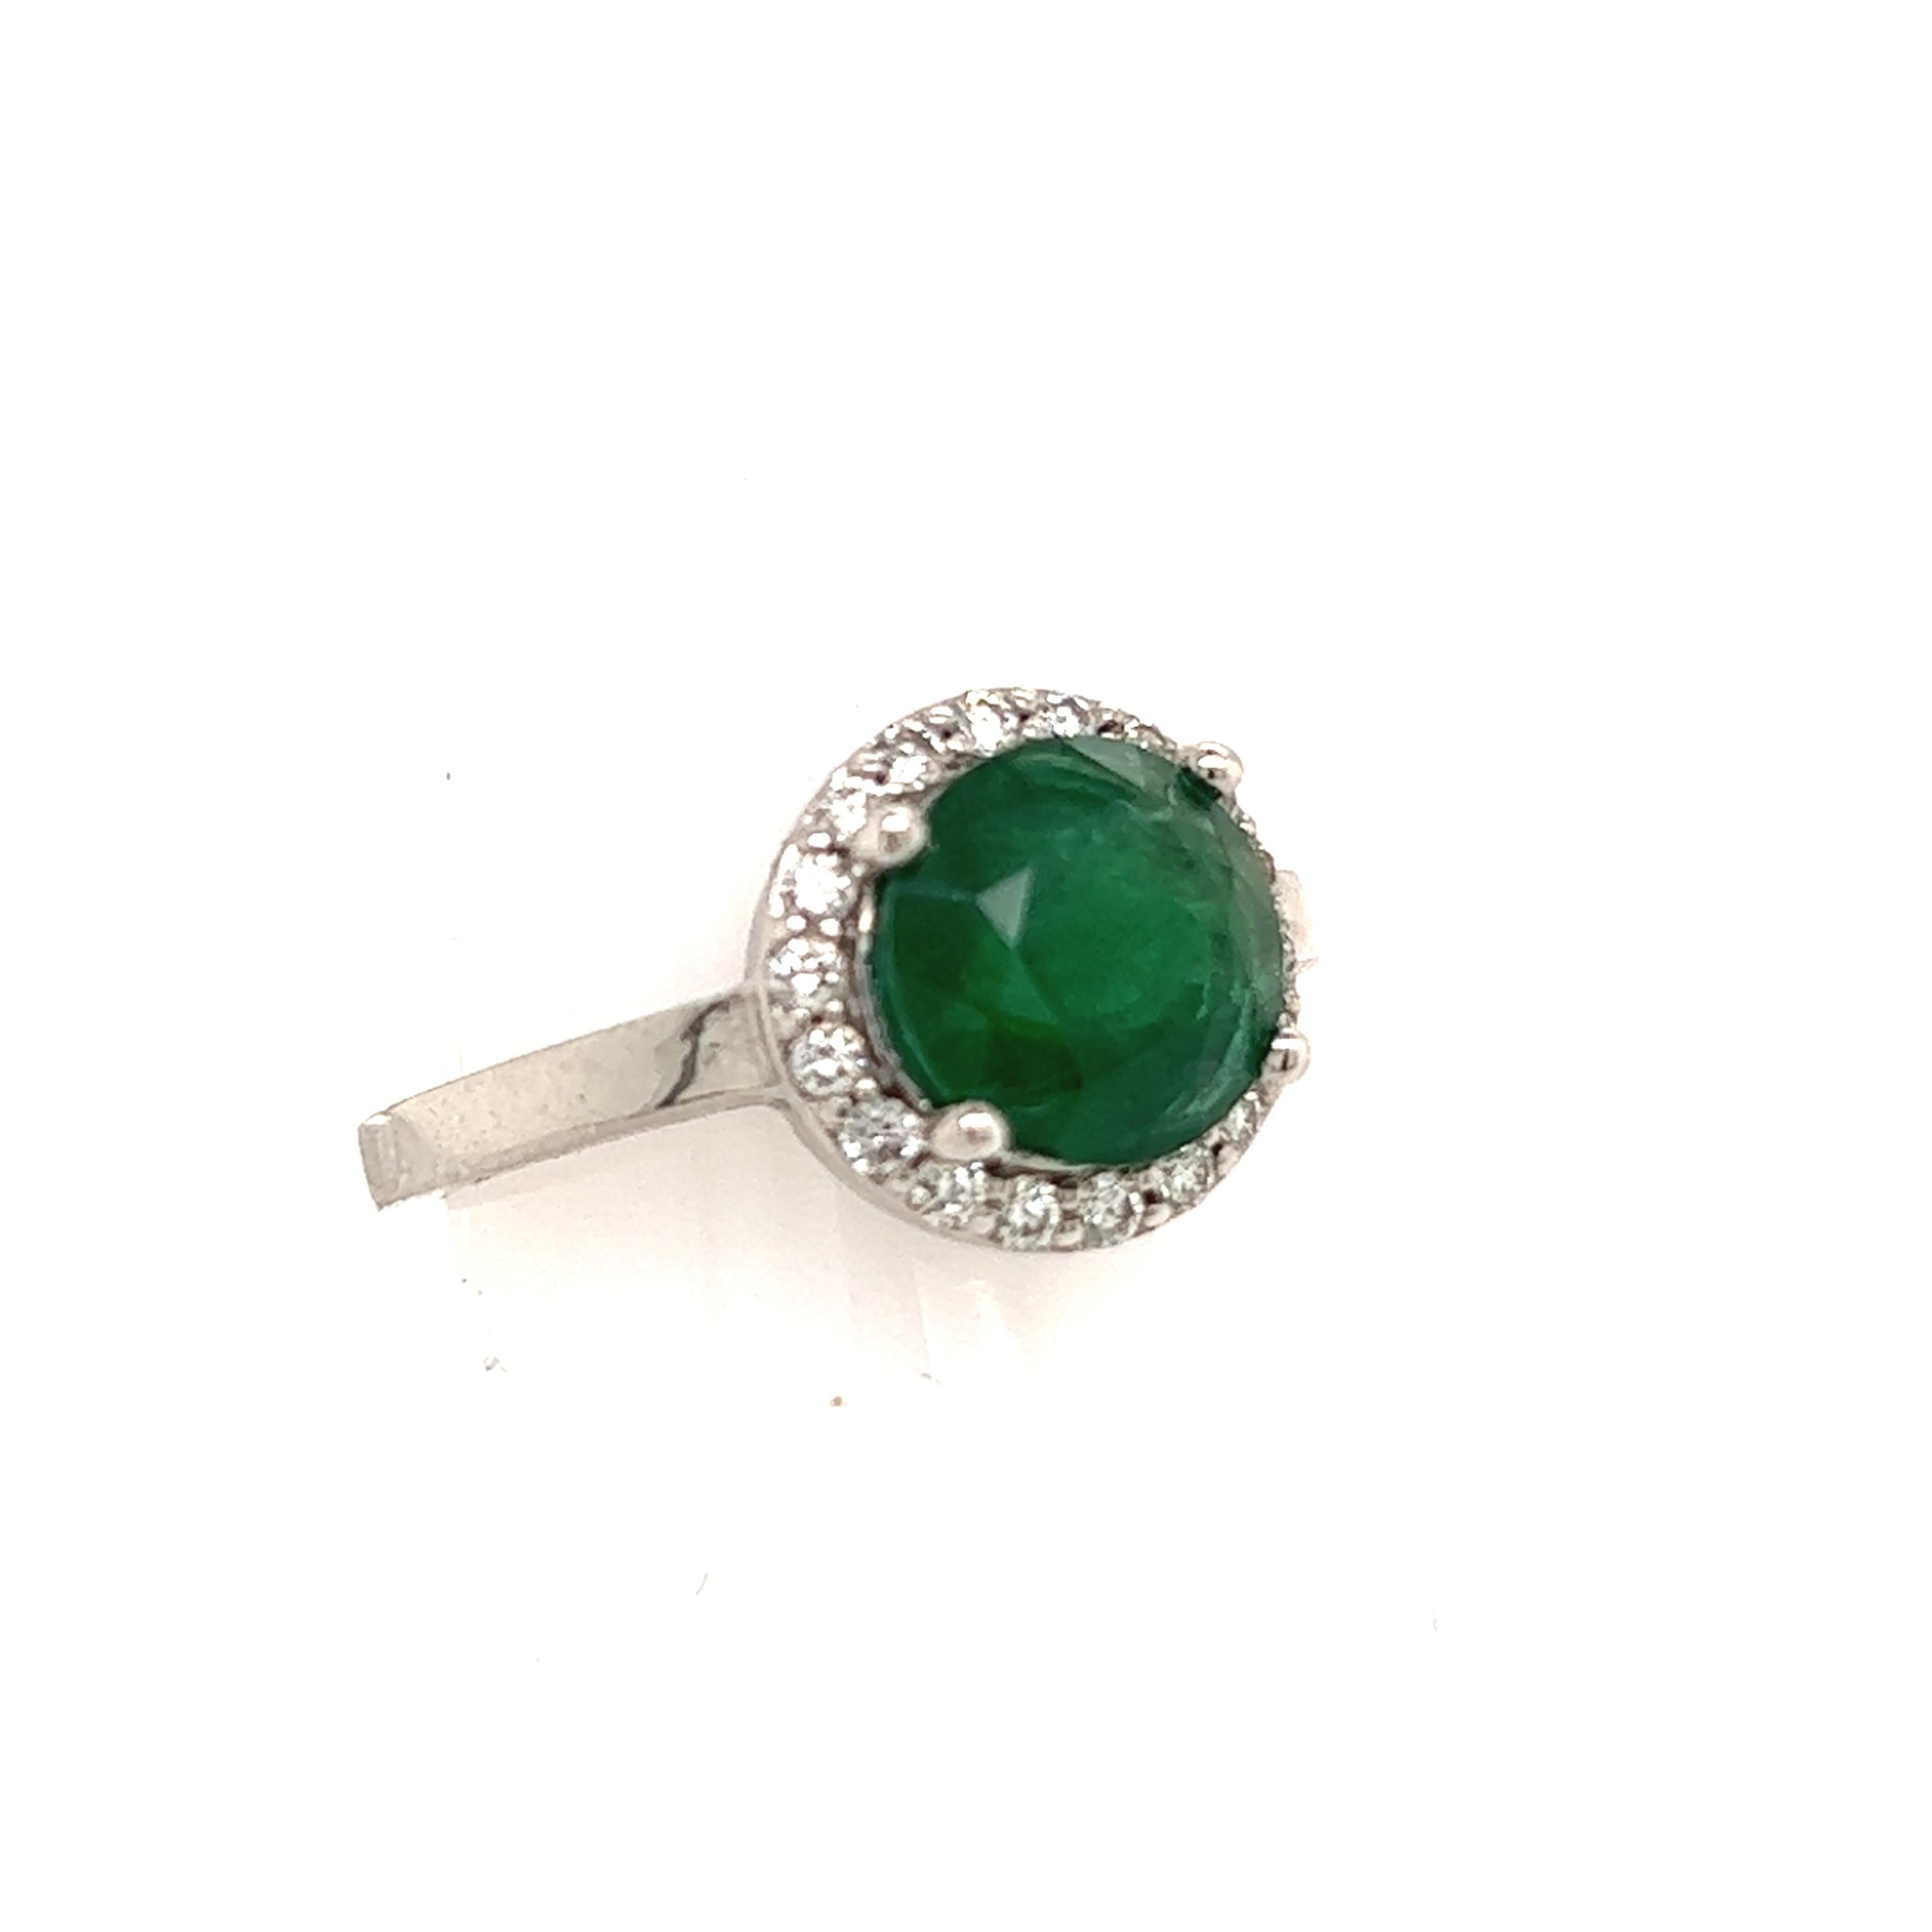 Natural Emerald Diamond Ring 14k Gold 2.83 TCW Certified For Sale 4